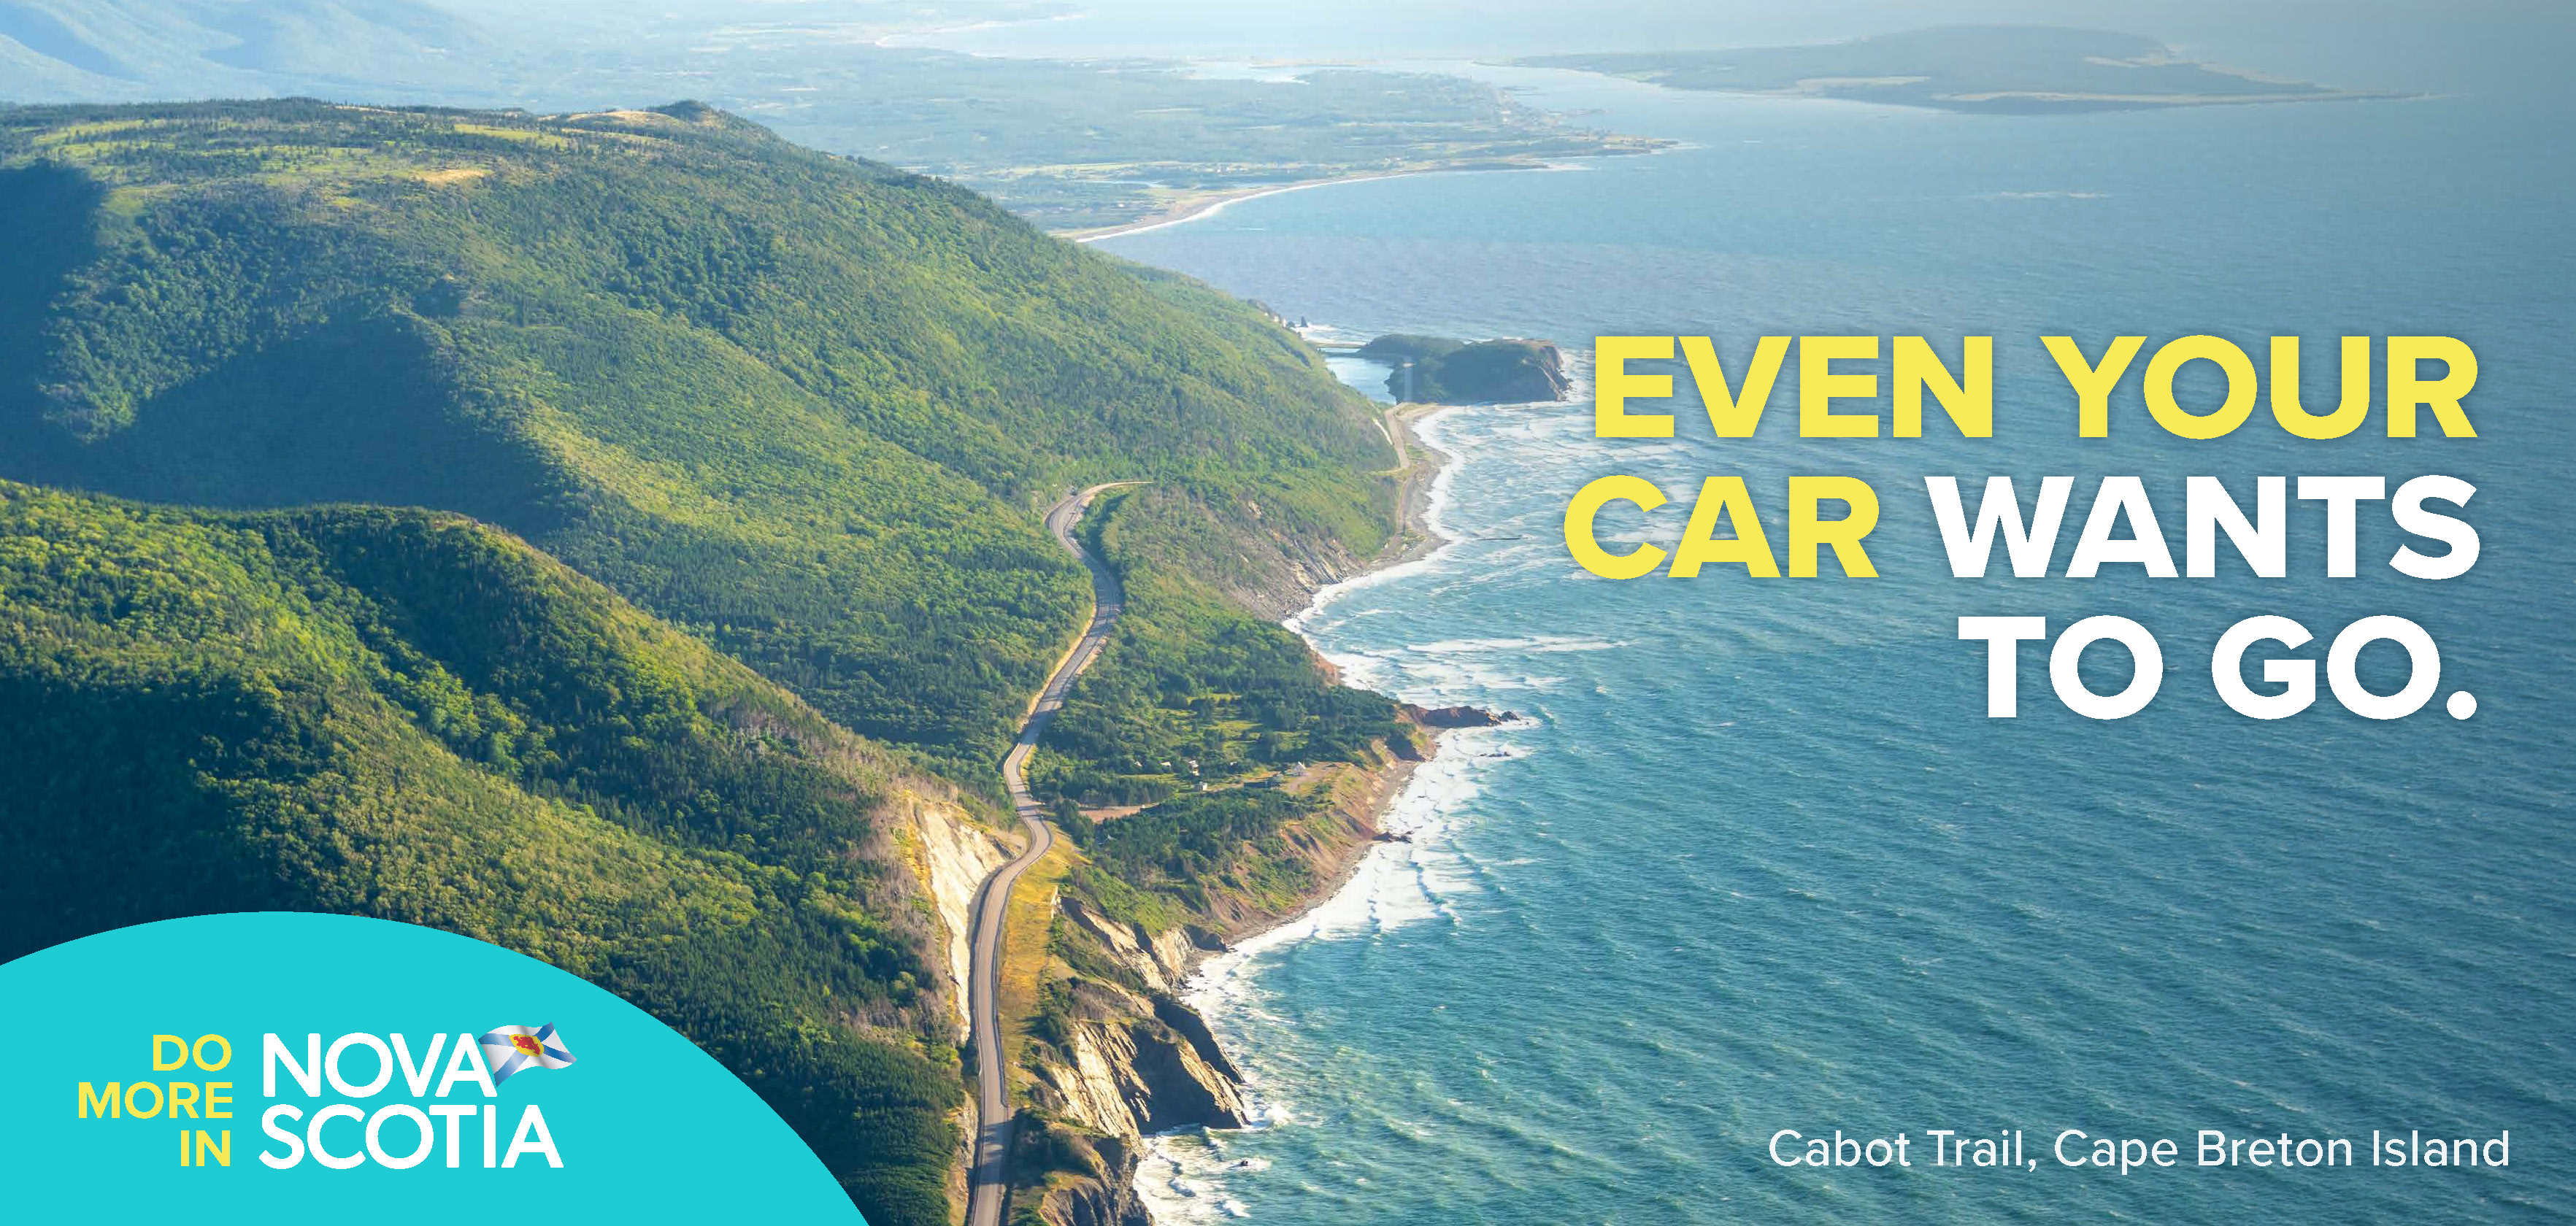 Image of the road winding between the coastline and the mountains in Cape Breton Highlands. Text reads: Even your car wants to go.